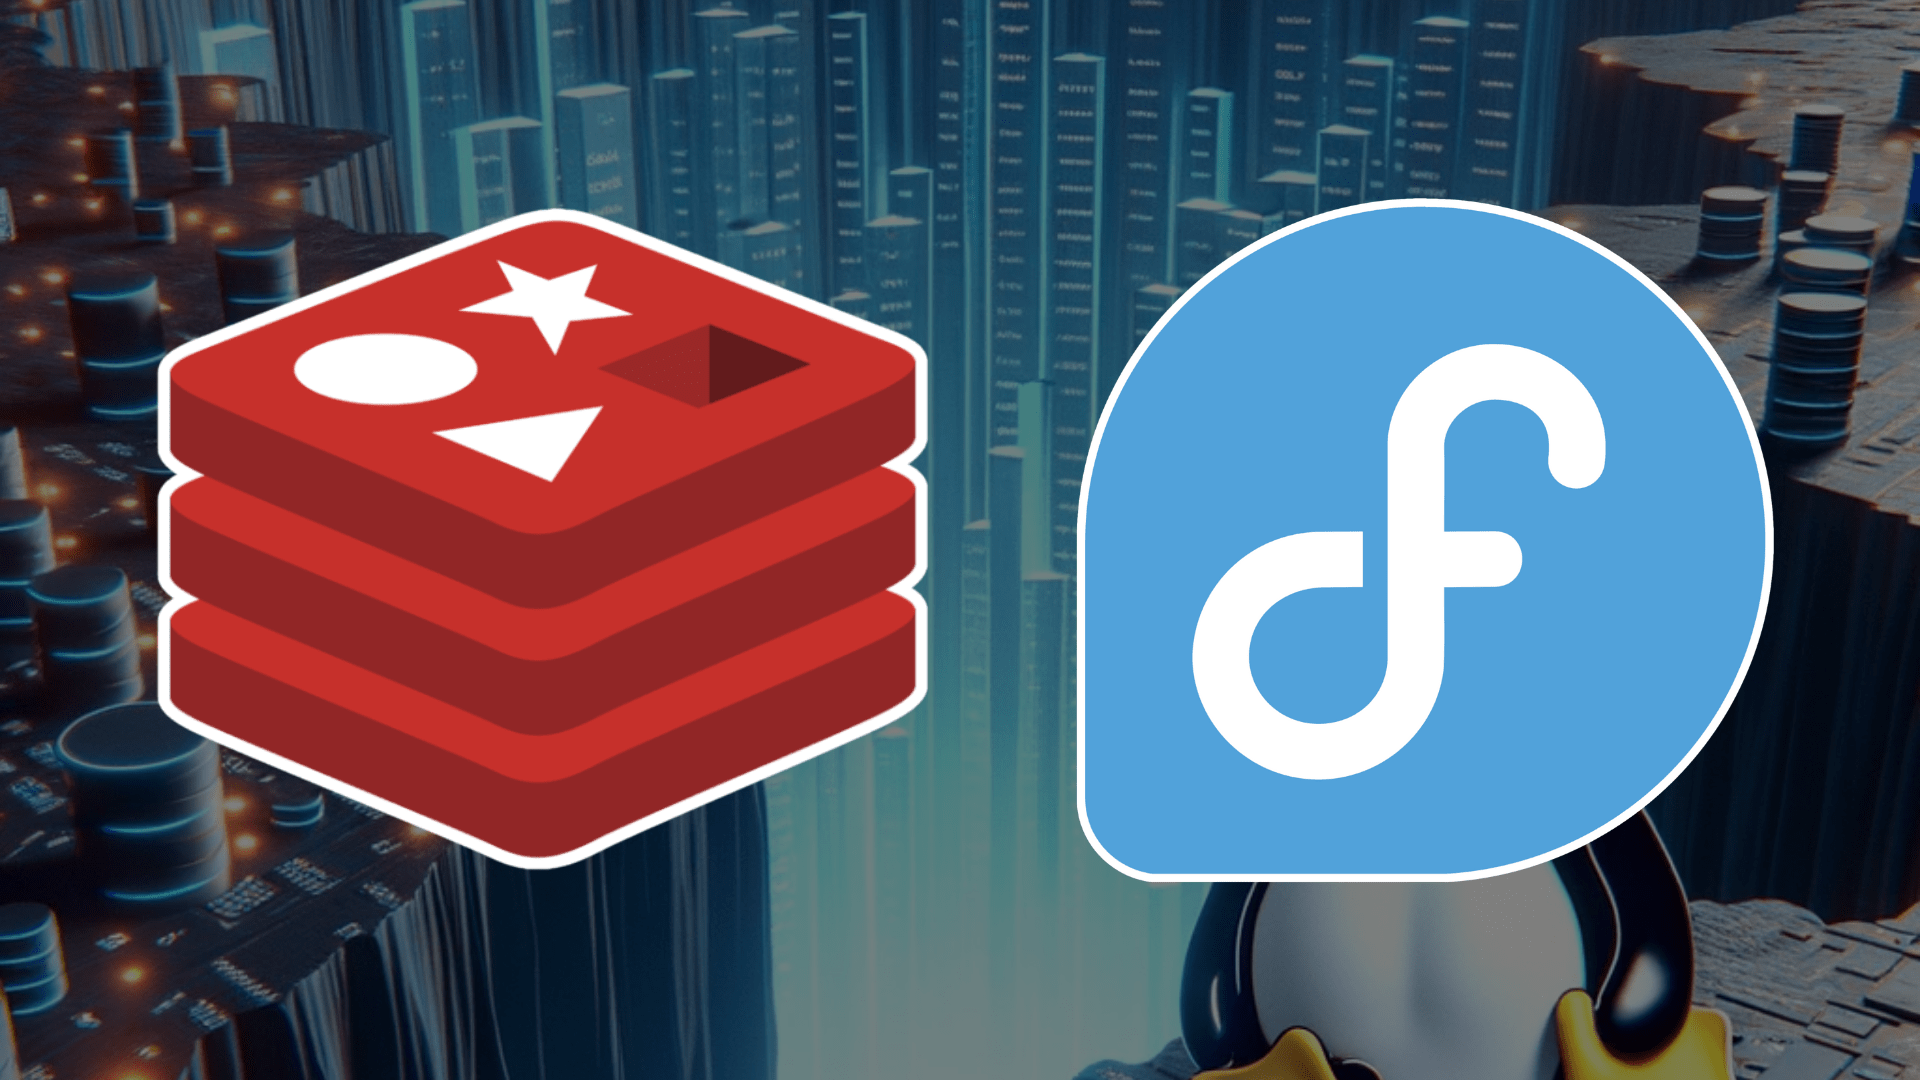 Step-by-step Redis installation on Fedora Linux